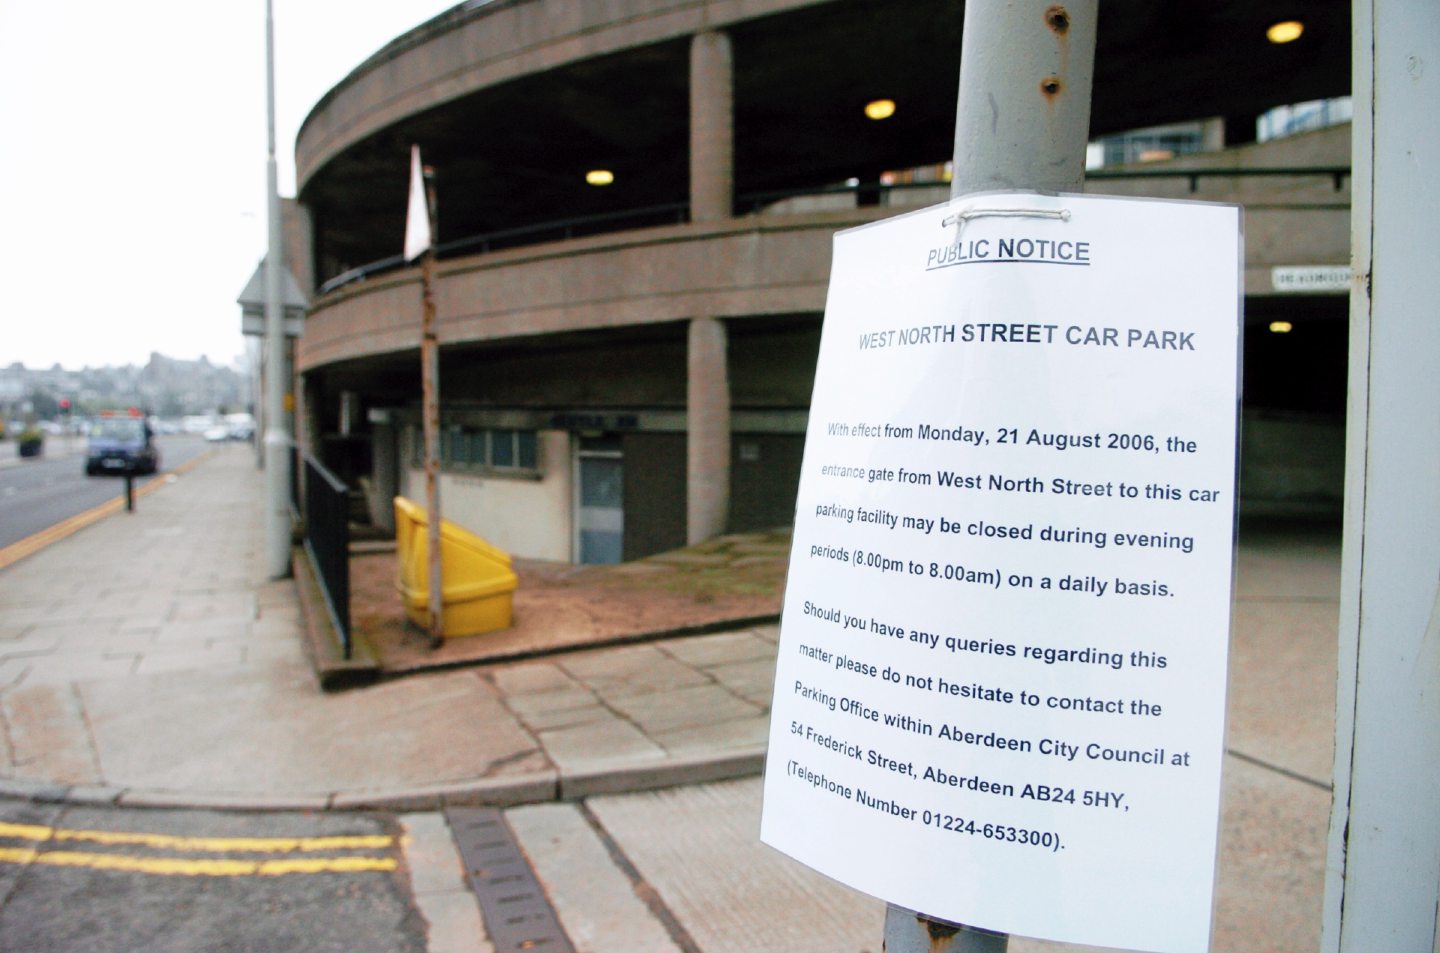 A sign outside West North Street car park explaining the closure of the car park overnight